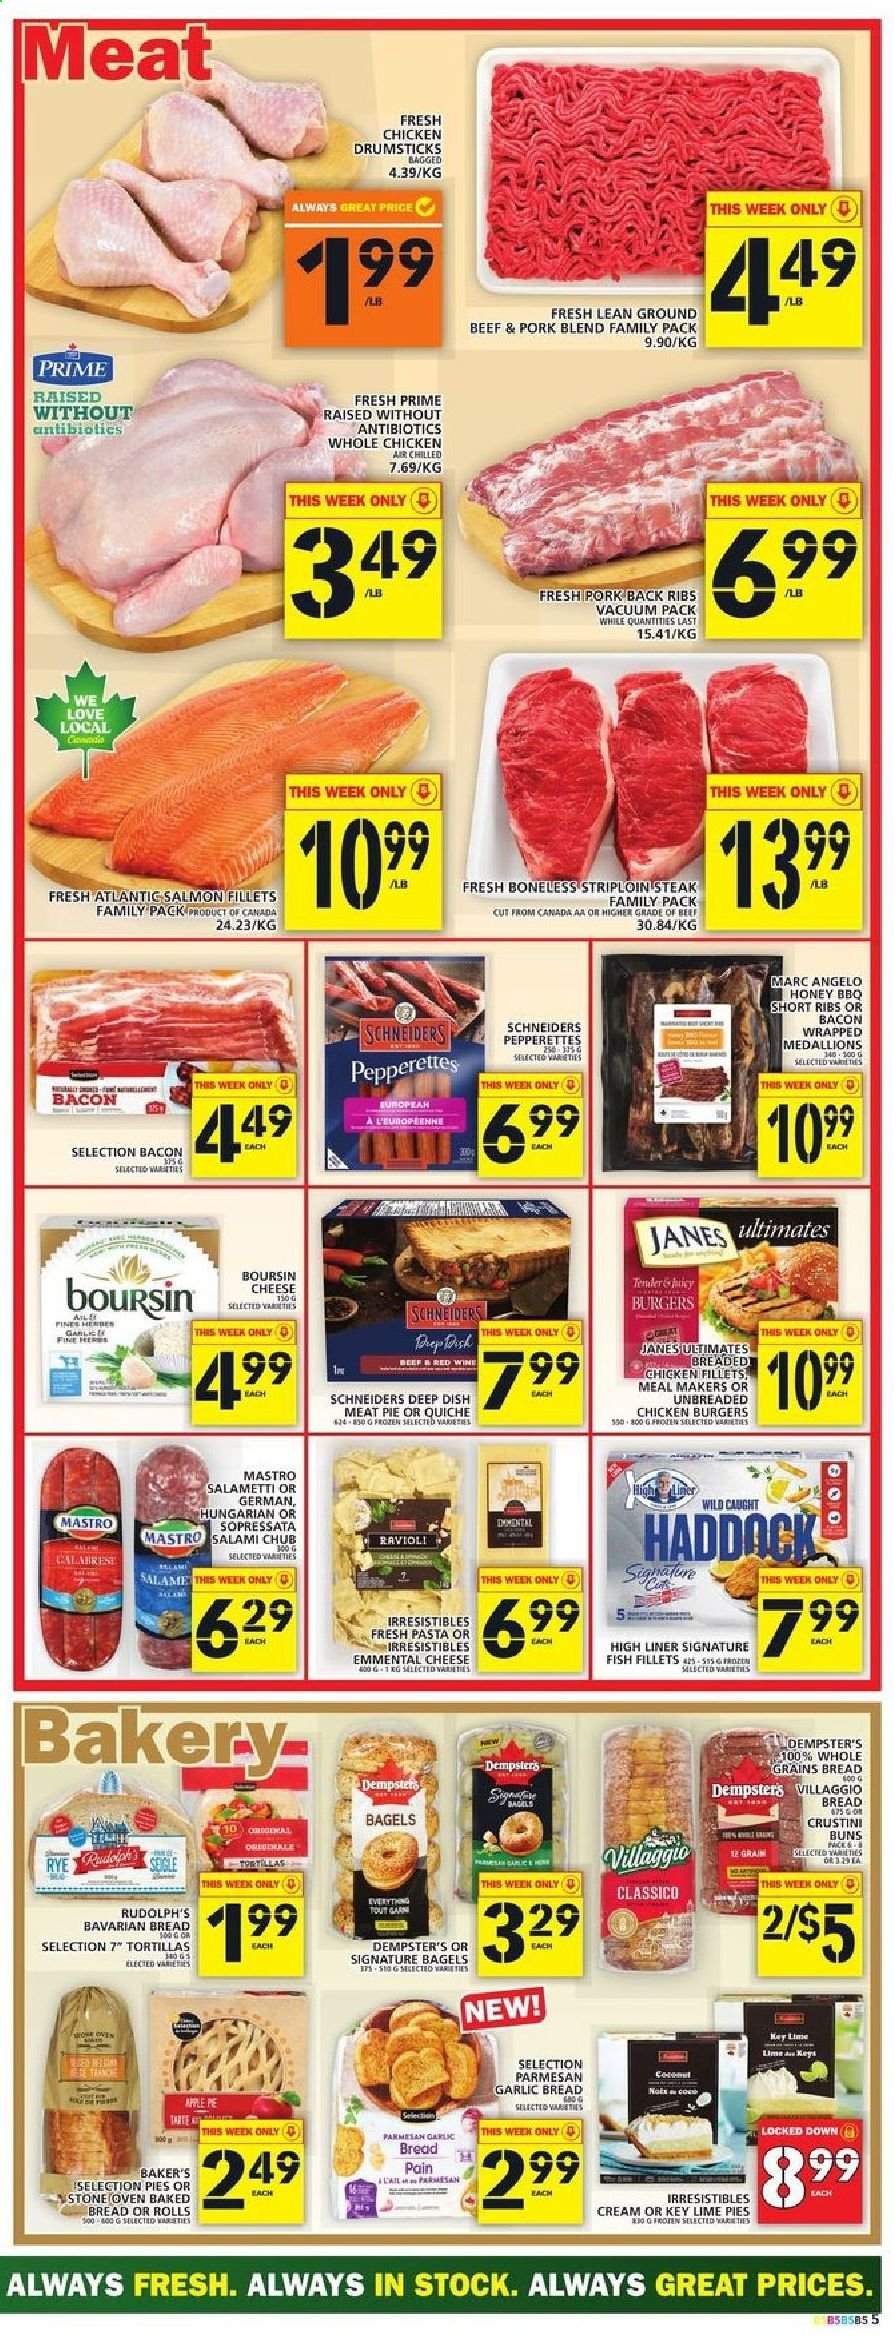 thumbnail - Food Basics Flyer - August 26, 2021 - September 01, 2021 - Sales products - bread, tortillas, pie, buns, fish fillets, fish, ravioli, hamburger, bacon, salami, parmesan, cheese, Classico, honey, whole chicken, chicken drumsticks, chicken, beef meat, ground beef, striploin steak, pork meat, pork ribs, pork back ribs, steak. Page 5.